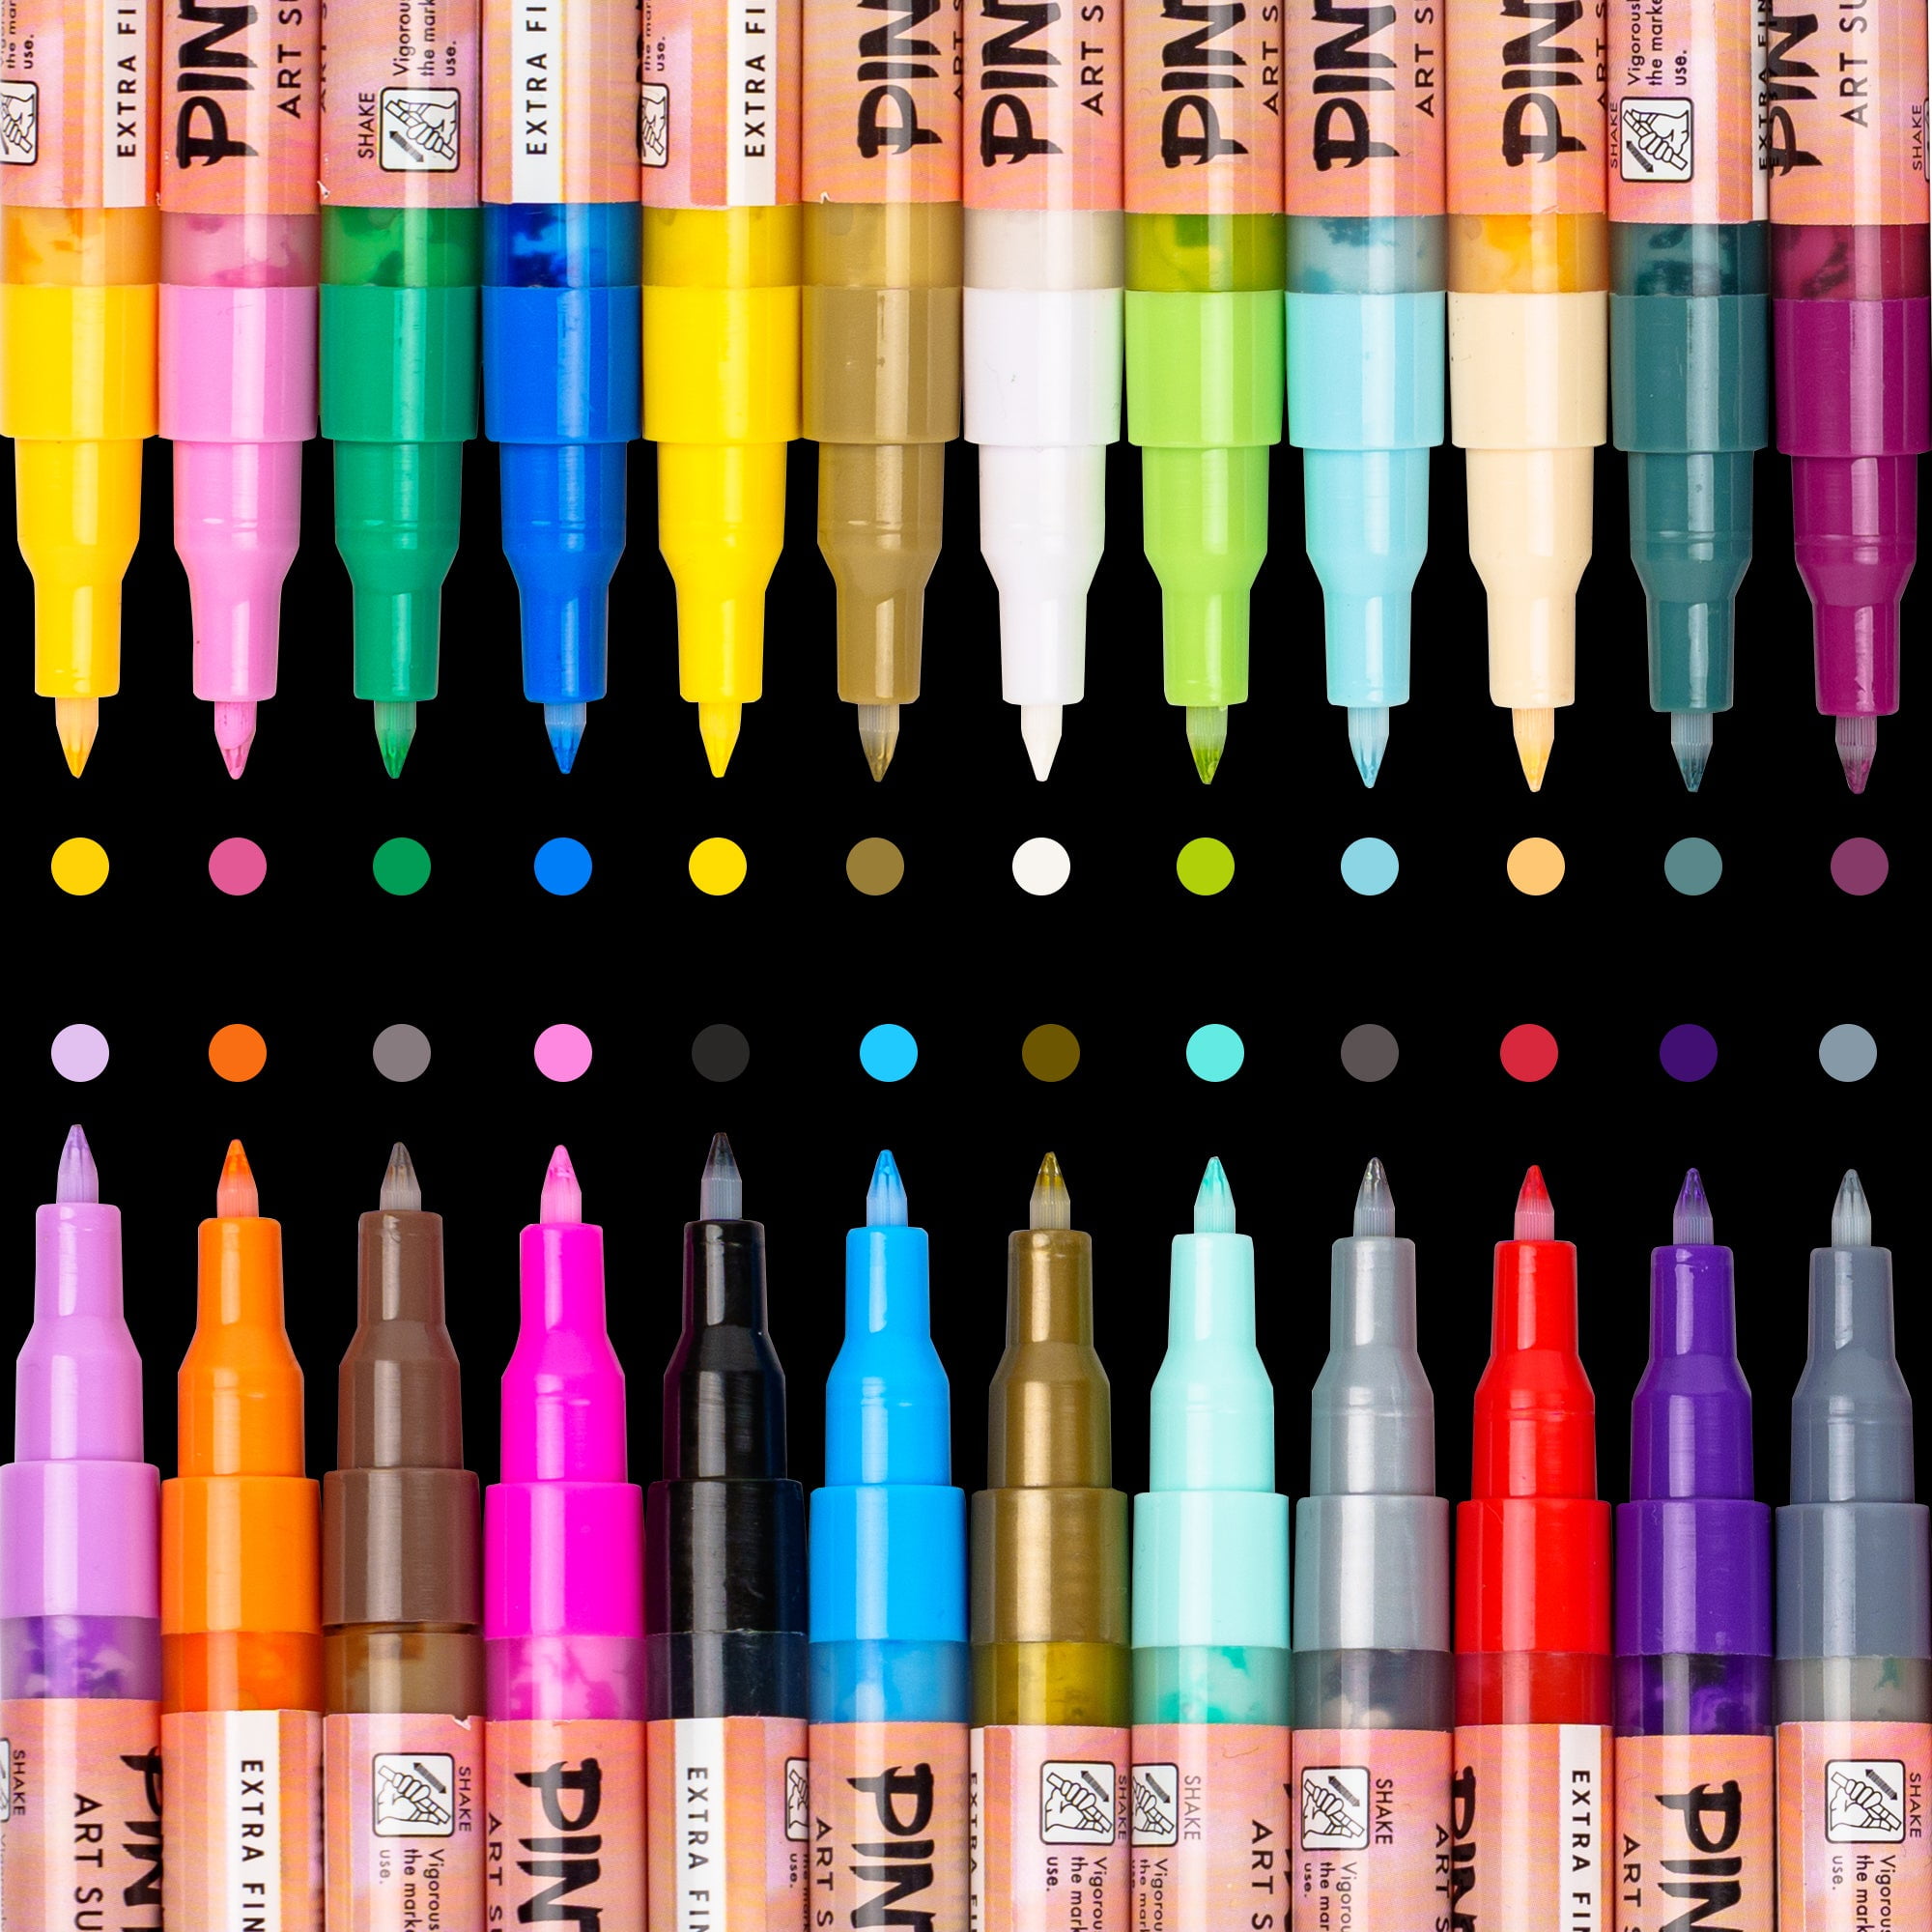 Pintar Earth Tone Paint Pens 0.7mm 20 Pack Marker Set With Extra Fine Tip, Use On Rocks, Canvas, Glass, Ceramics